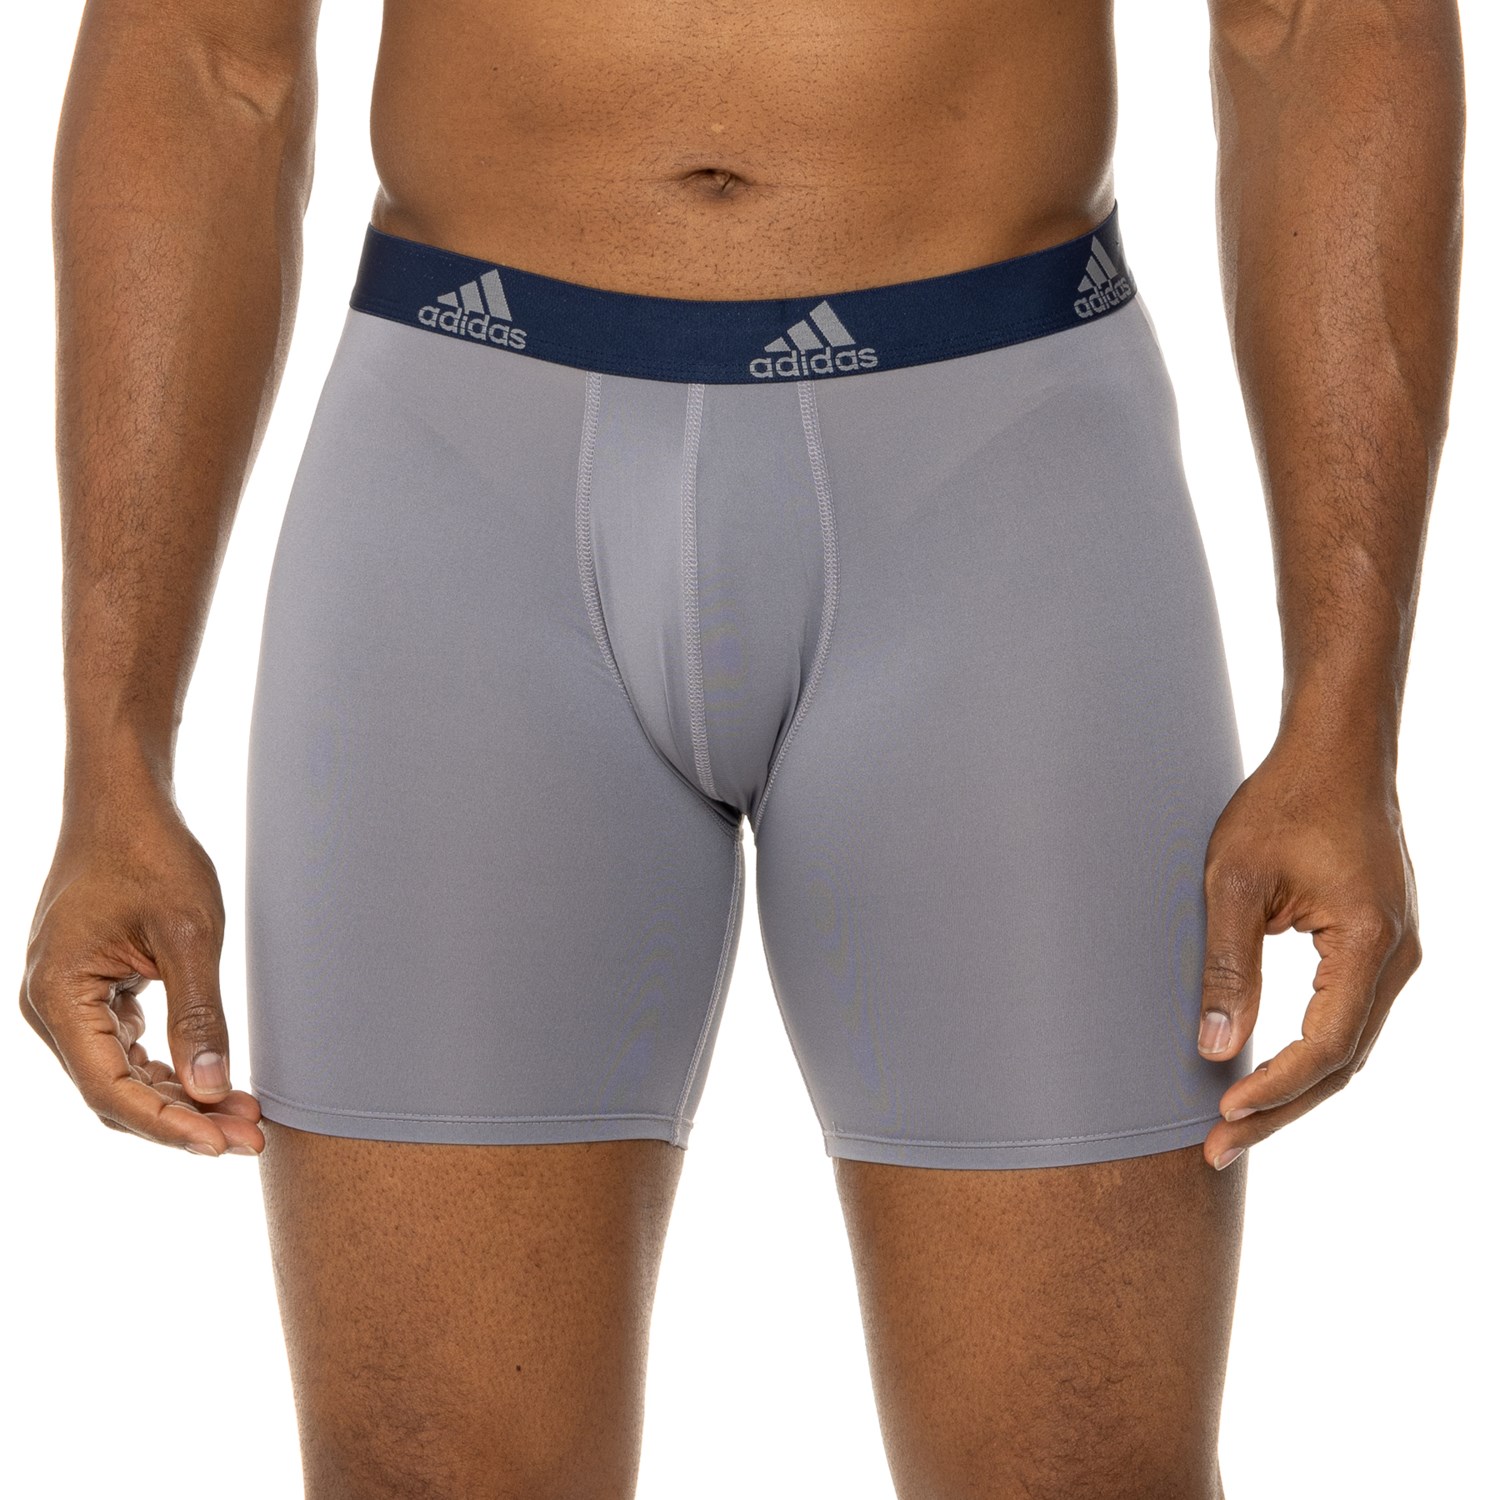 Sport-Performance 3-Pack 46% - - Boxer adidas Core Briefs Save